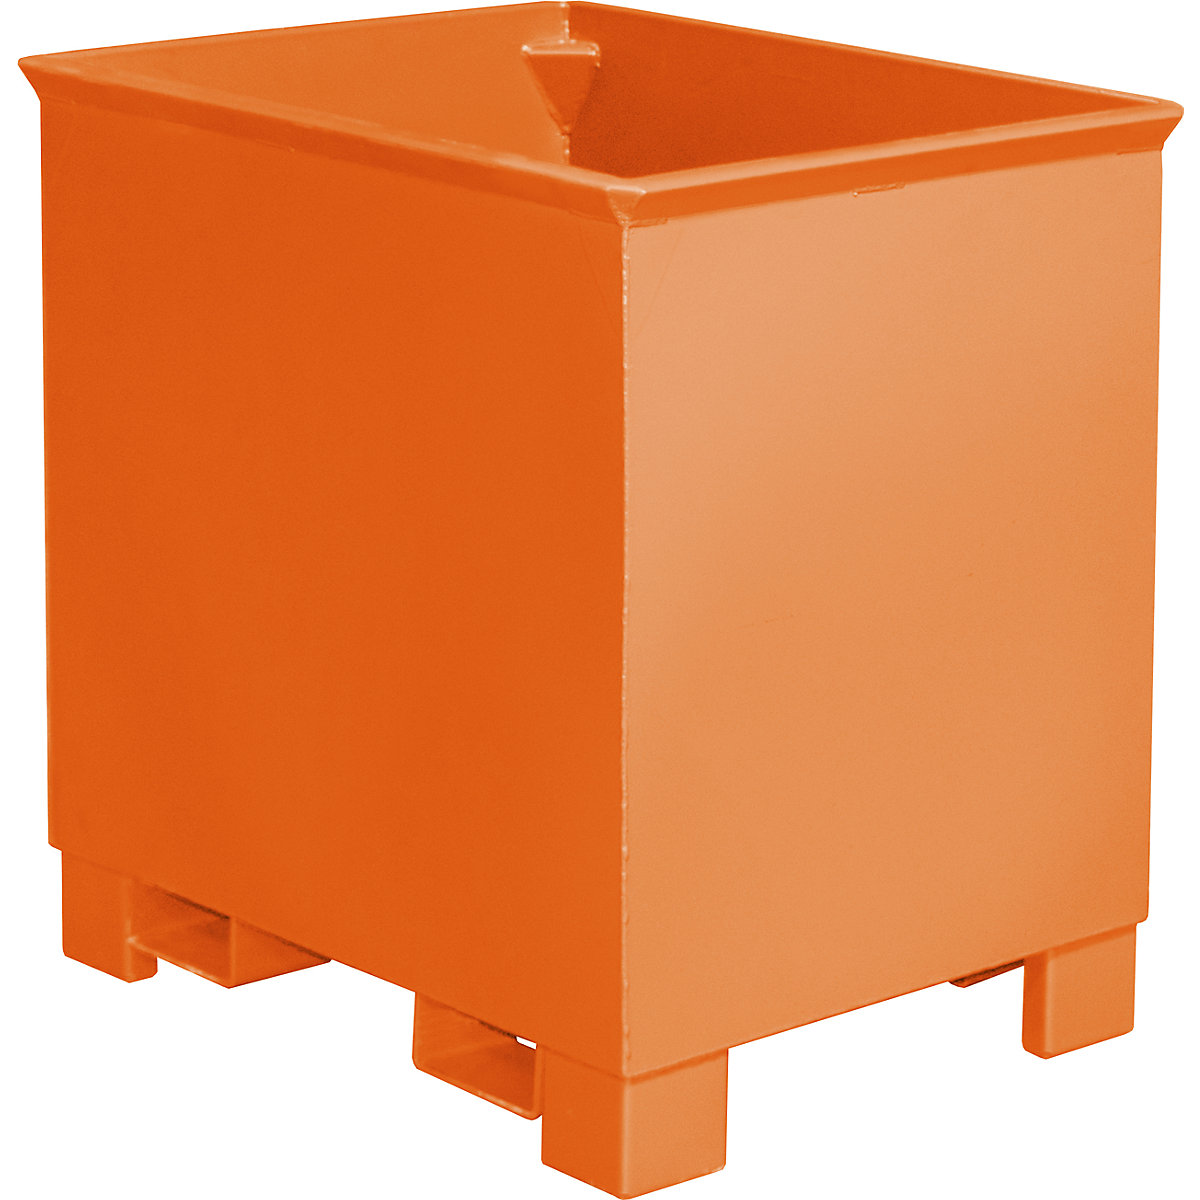 Collection container for tugger trains – eurokraft pro